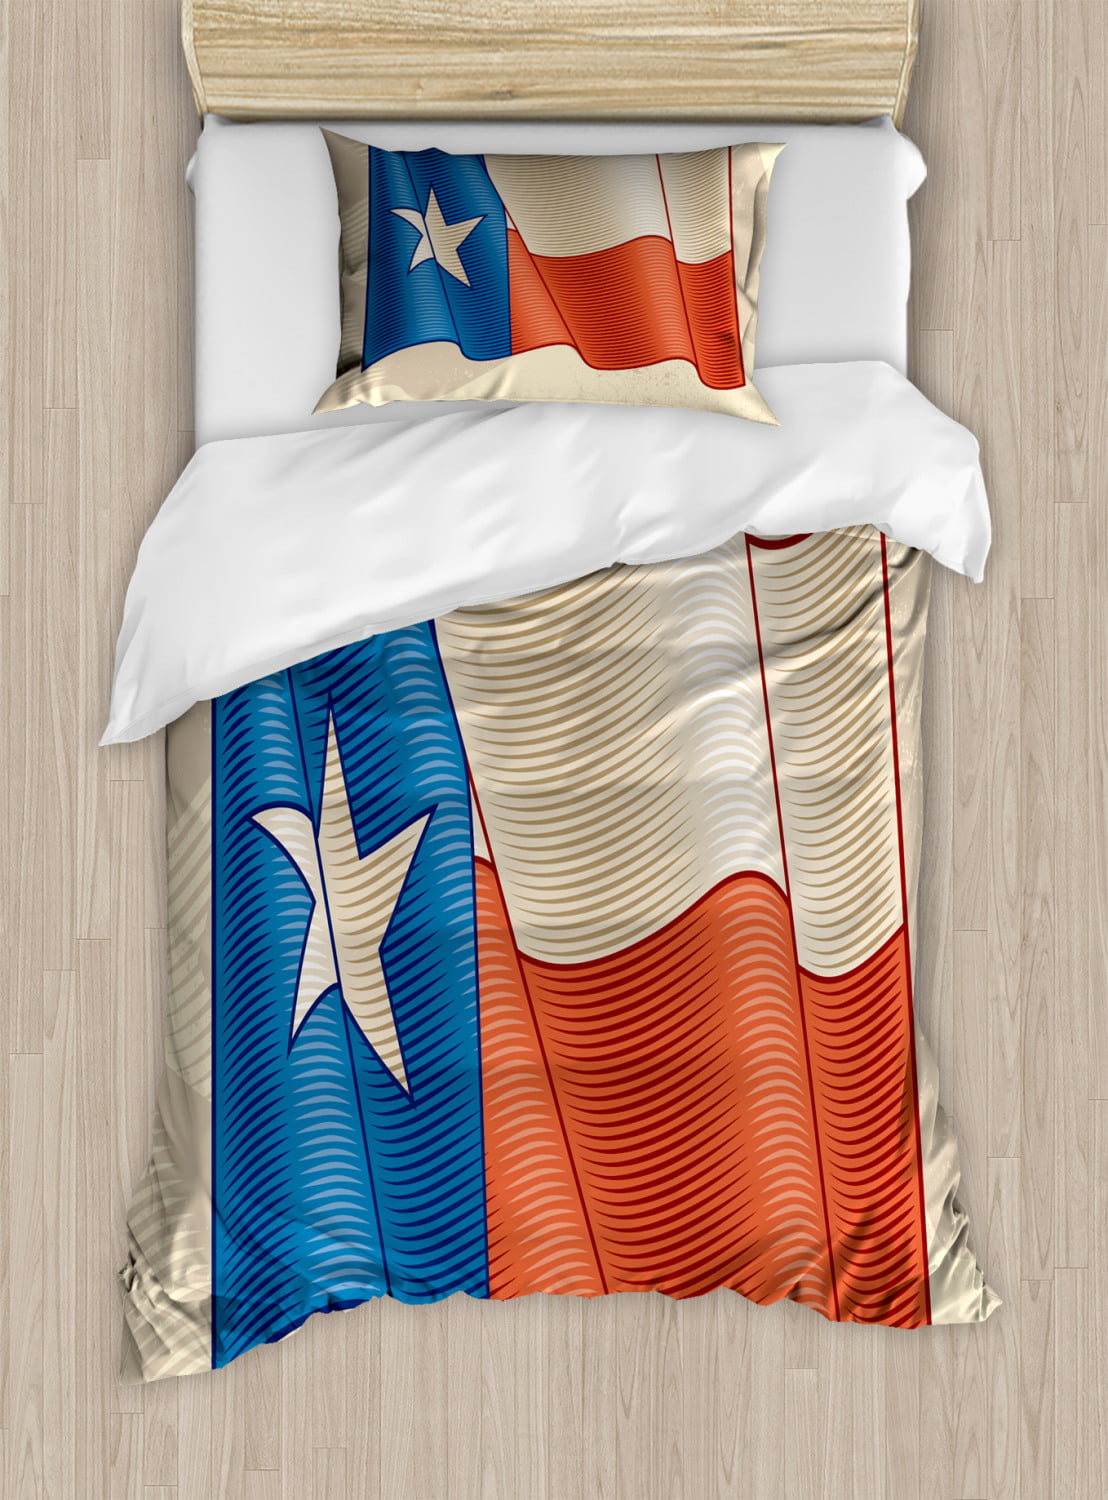 White Blue Decorative Quilted 3 Piece Coverlet Set with 2 Pillow Shams Lunarable Western Bedspread King Size Texas State Flag Painted on Crocodile Snake Skin Patriotic Emblem Image